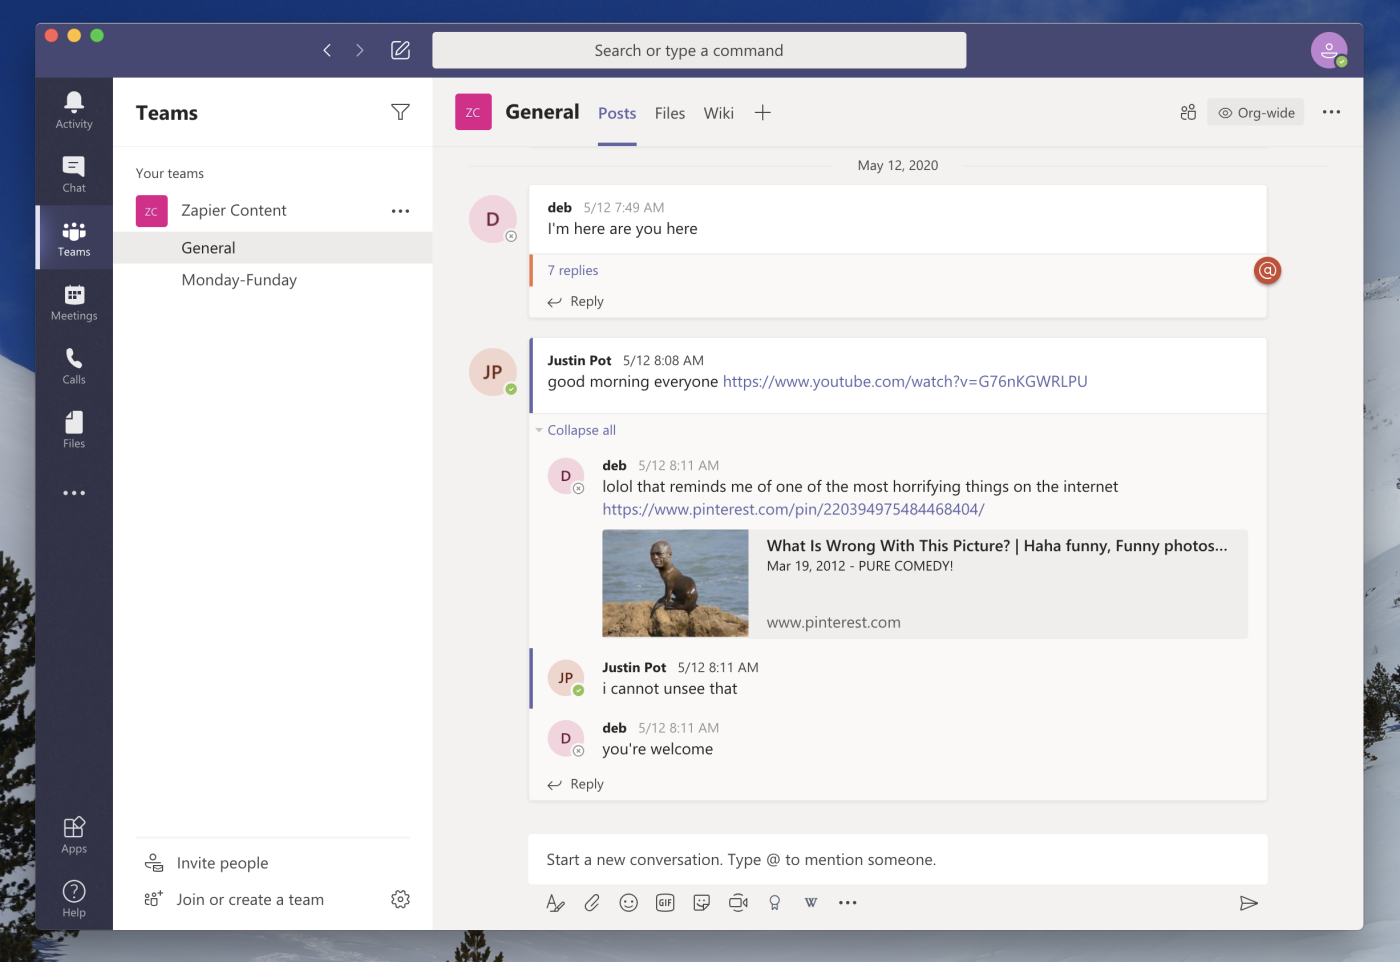 Microsoft Teams, our pick for the best team chat app for businesses broken down into teams